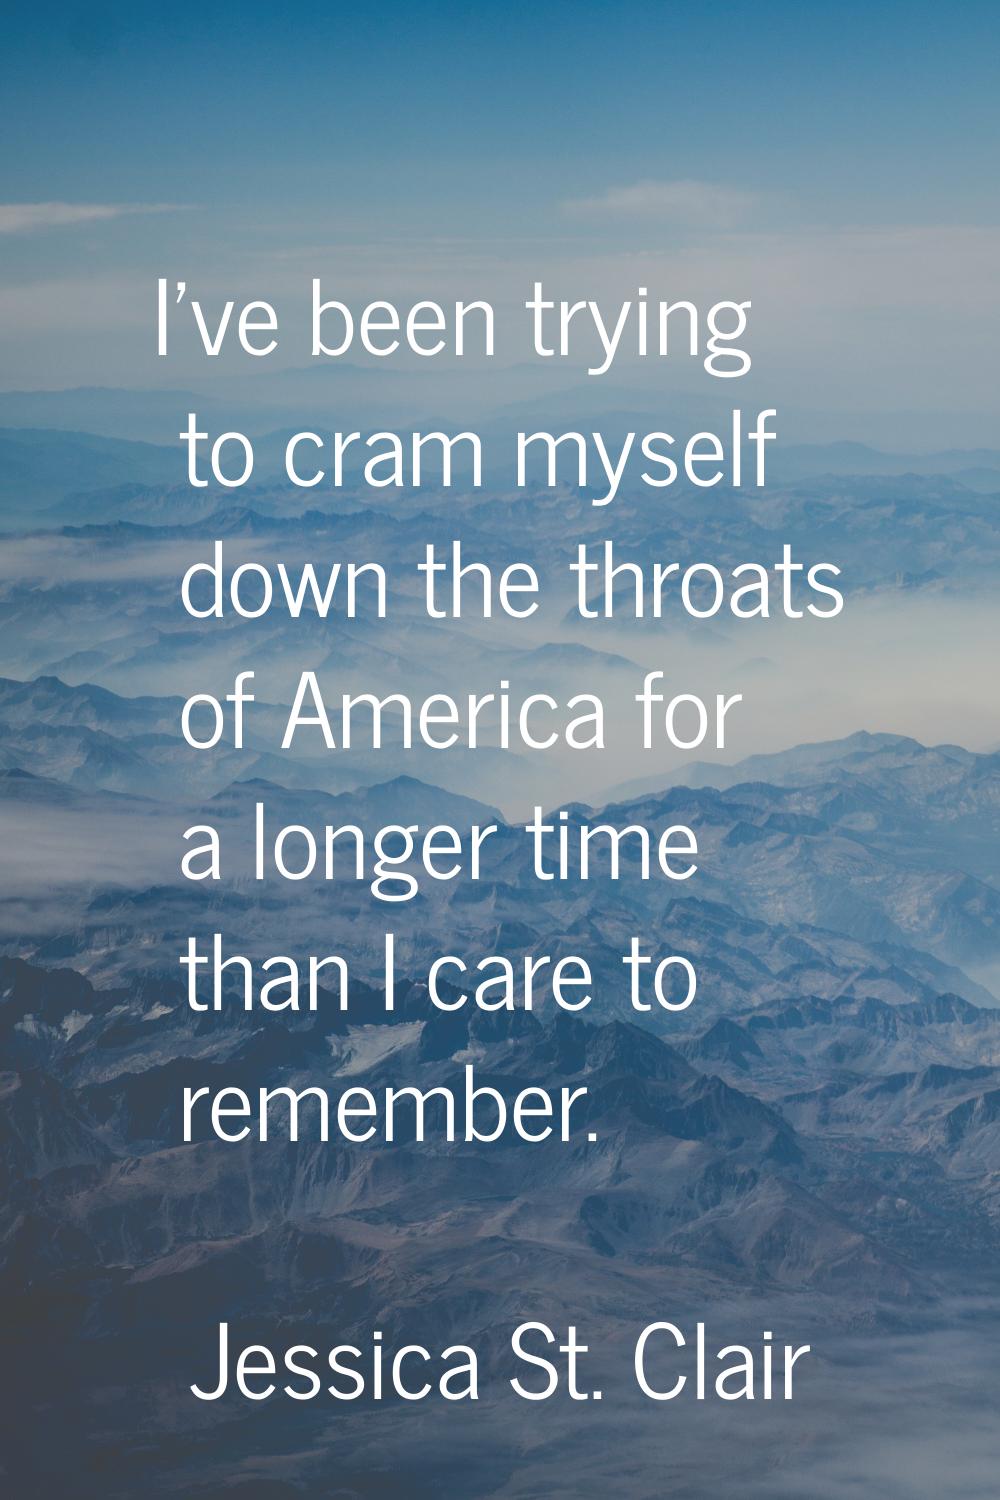 I've been trying to cram myself down the throats of America for a longer time than I care to rememb